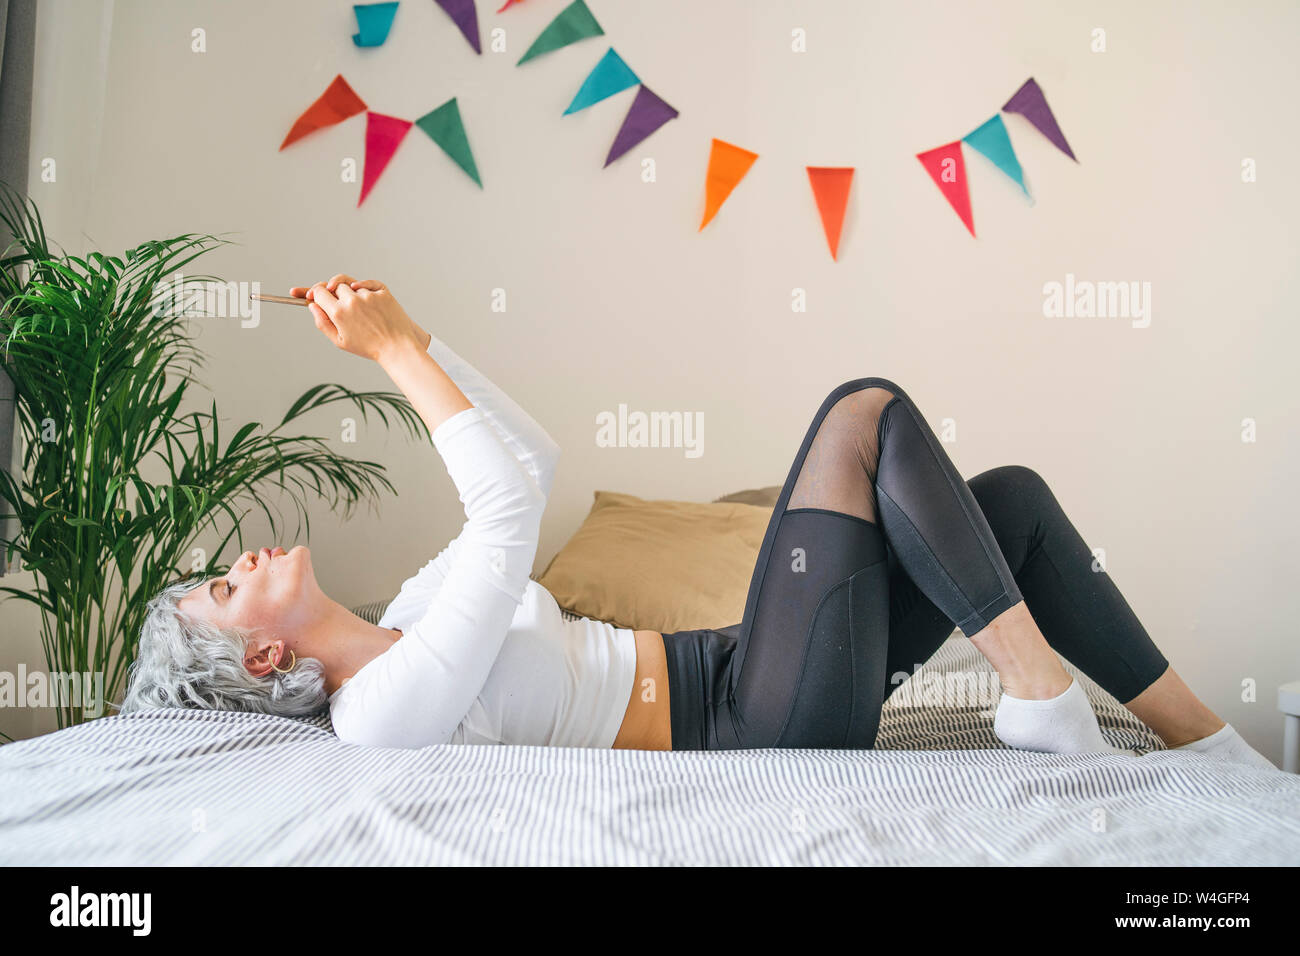 Woman lying on bed at home taking a selfie Stock Photo